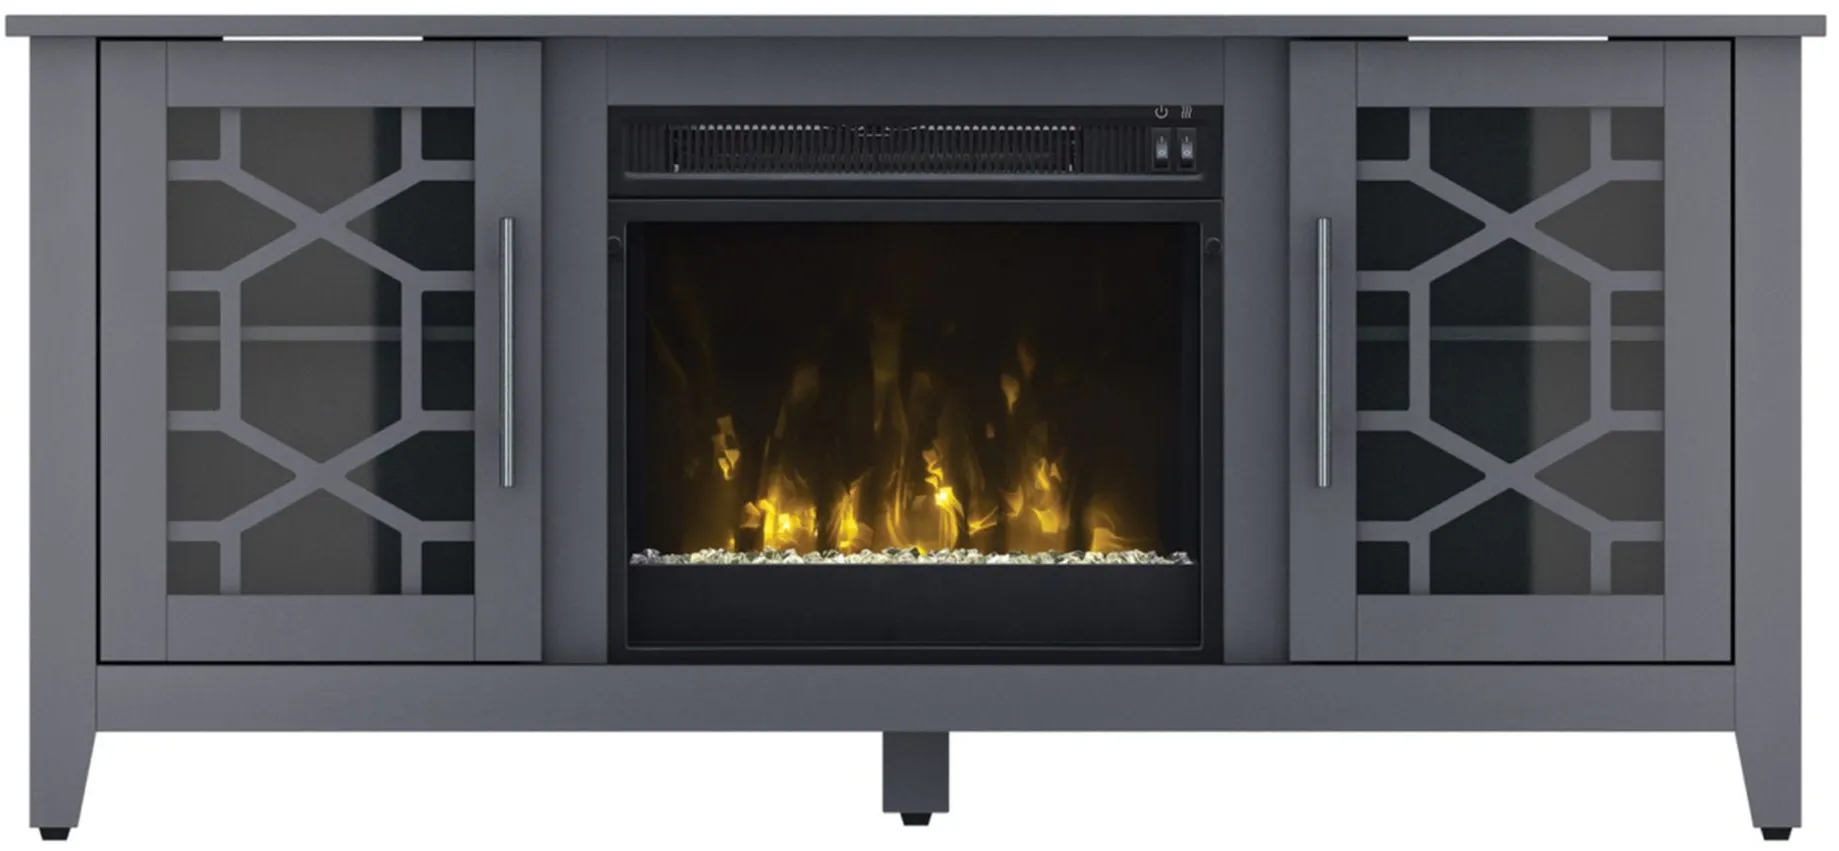 Lilian 60" TV Stand with Electric Fireplace in Cool Gray by Twin-Star Intl.